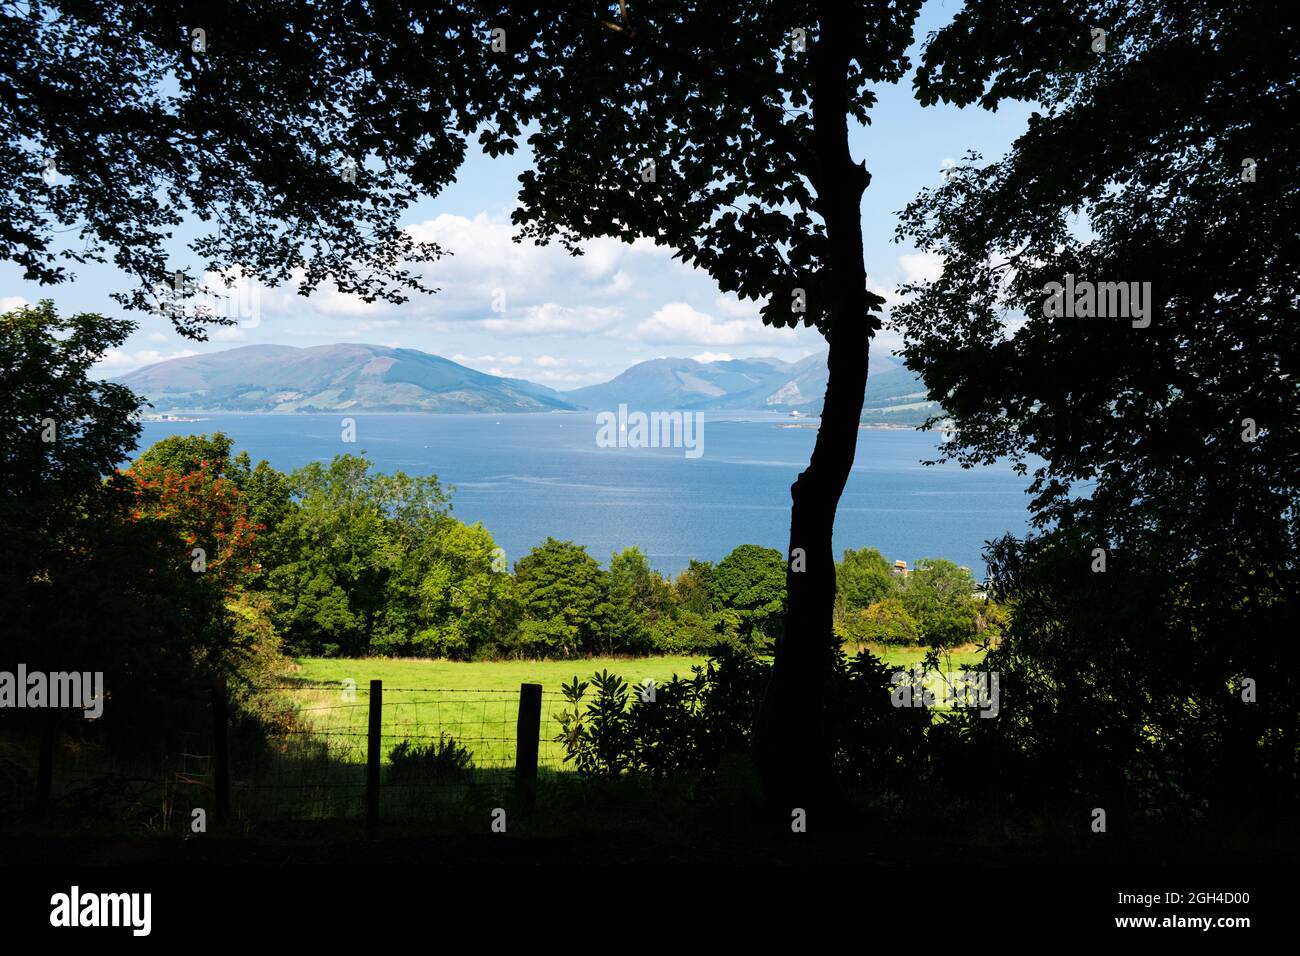 View of Bute from Bogany Wood or Skippers Wood, Rothesay, Isle of Bute, Argyll and Bute, Scotland, UK Stock Photo